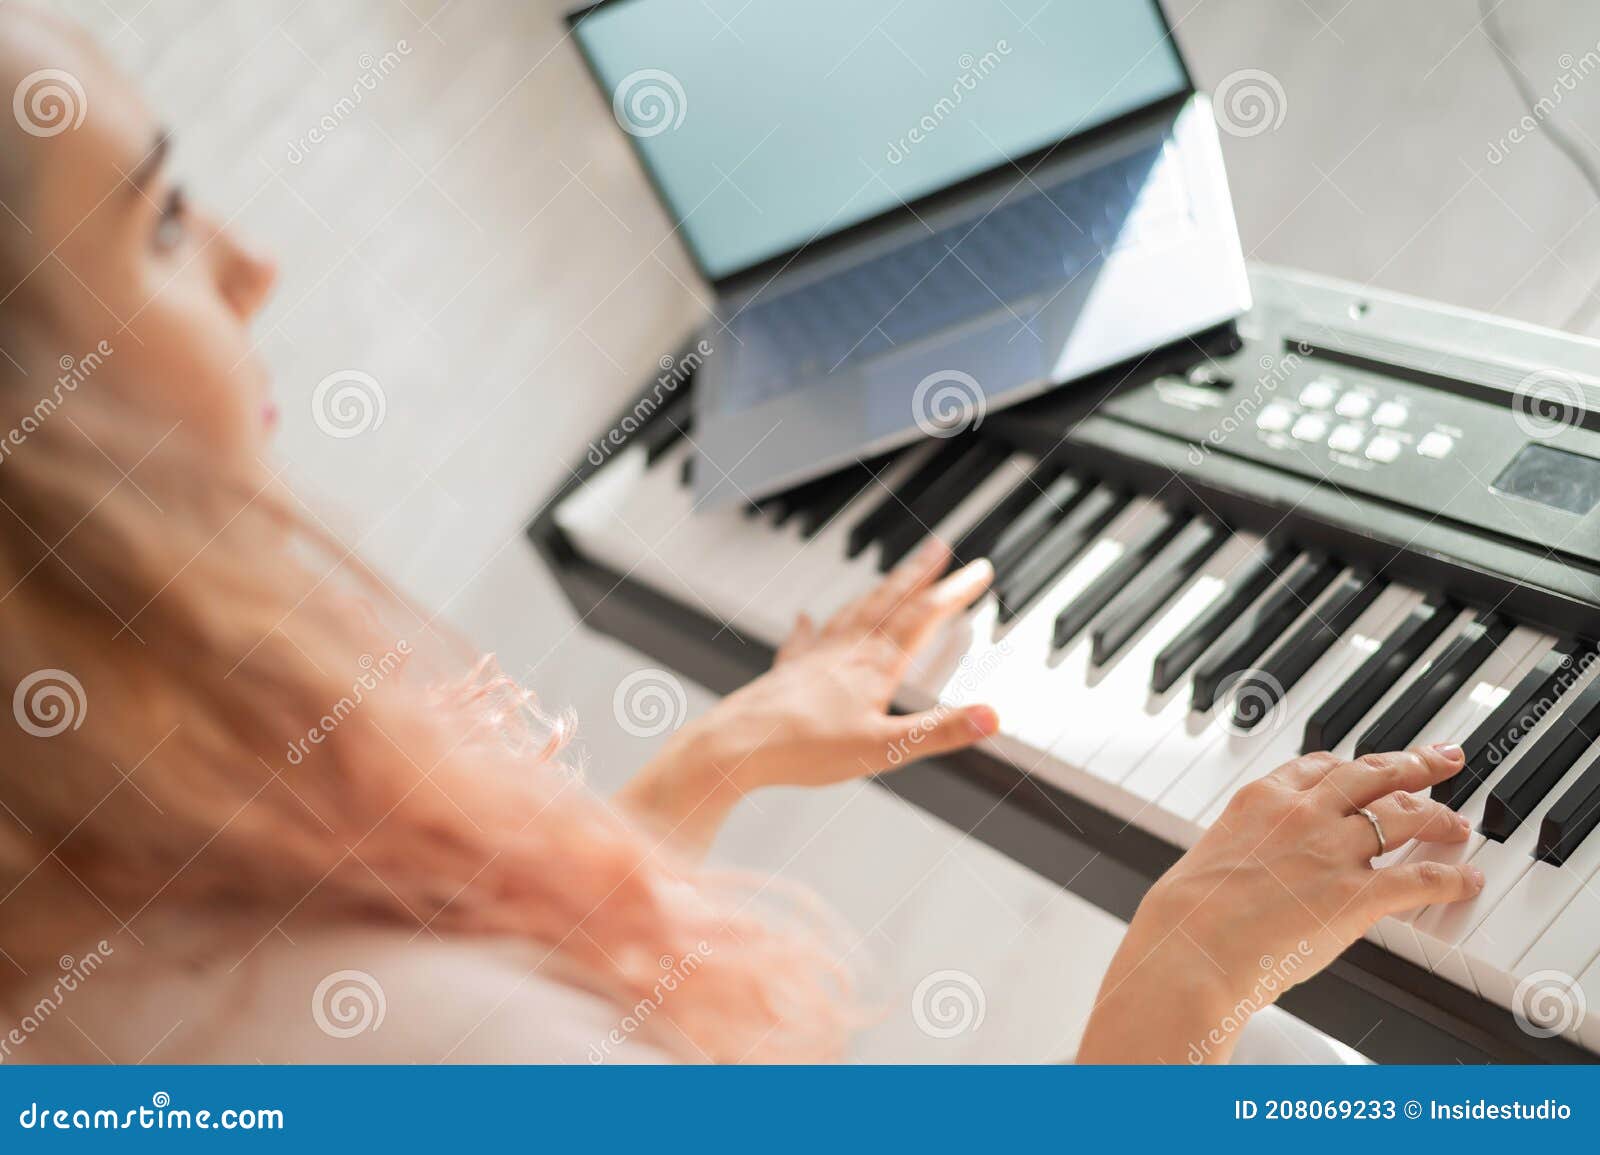 Mulher ensinando a tocar piano online